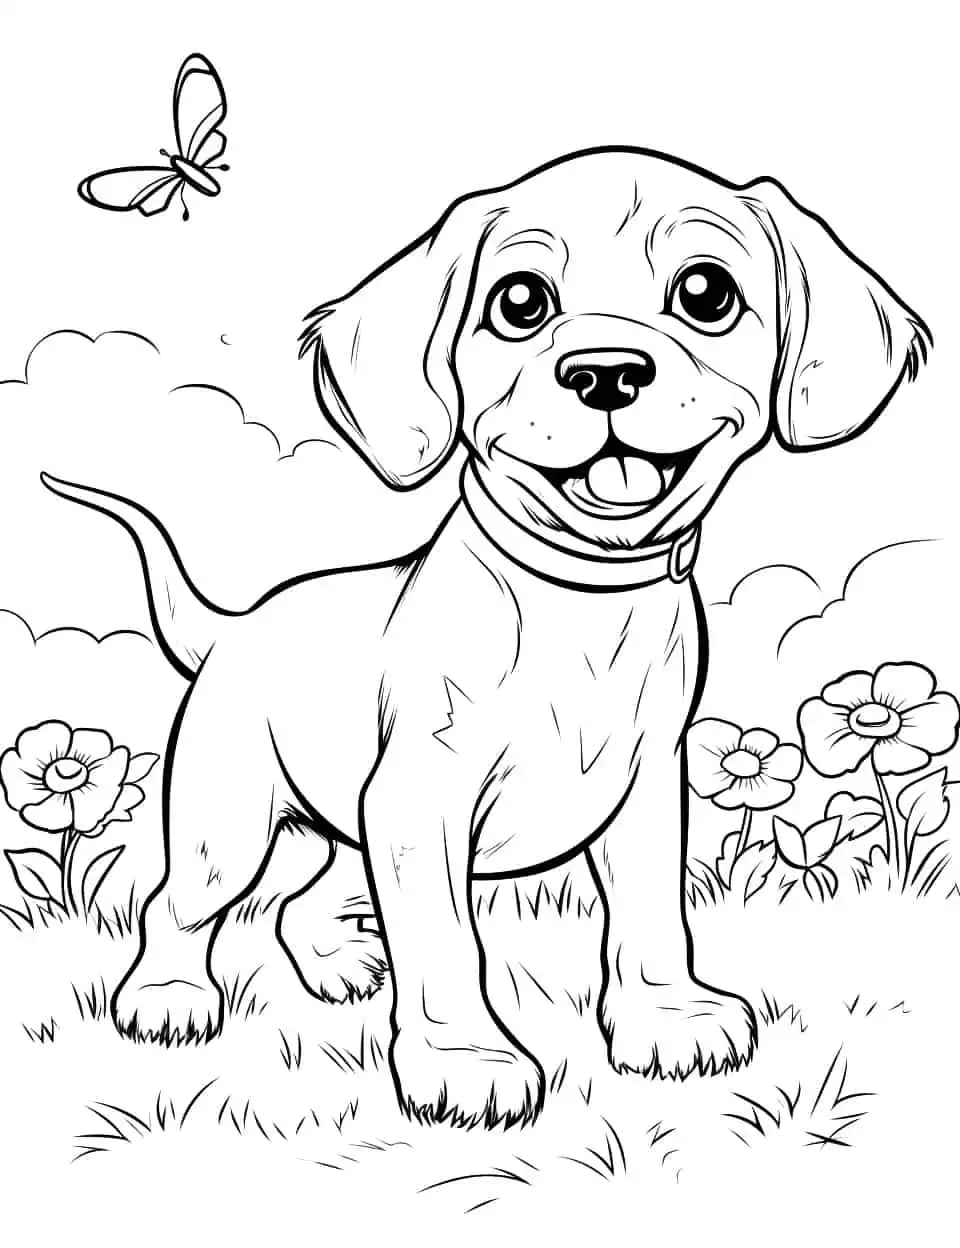 Playful Beagle Dog Coloring Page - A playful Beagle chasing a butterfly across a park.